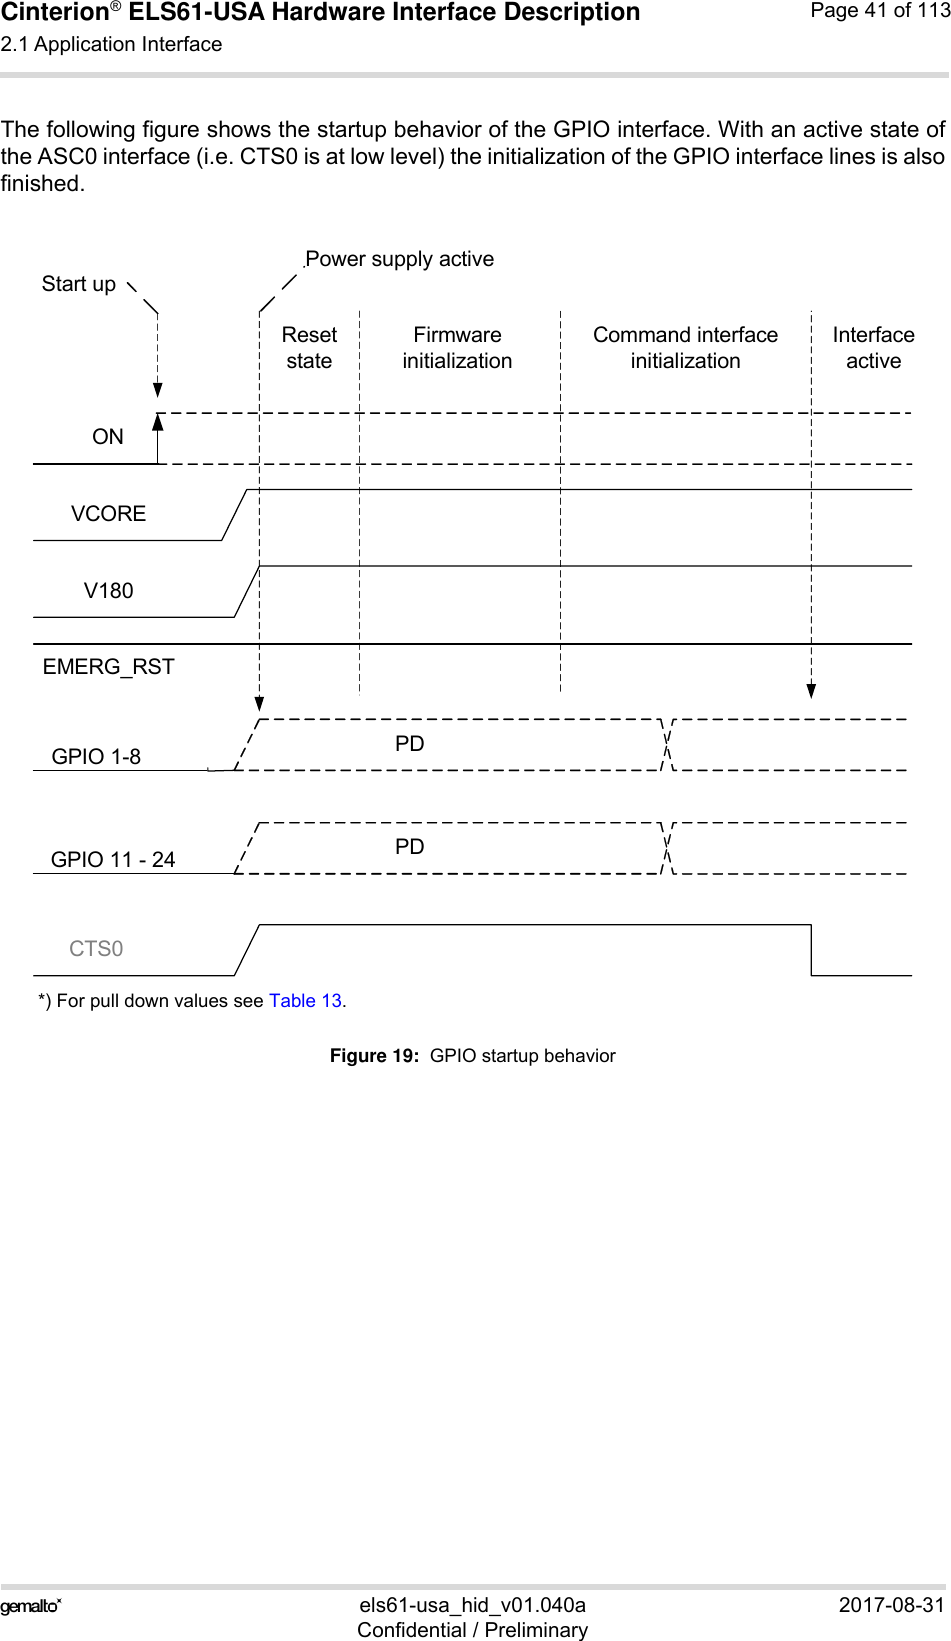 Cinterion® ELS61-USA Hardware Interface Description2.1 Application Interface59els61-usa_hid_v01.040a 2017-08-31Confidential / PreliminaryPage 41 of 113The following figure shows the startup behavior of the GPIO interface. With an active state ofthe ASC0 interface (i.e. CTS0 is at low level) the initialization of the GPIO interface lines is alsofinished.*) For pull down values see Table 13.Figure 19:  GPIO startup behaviorGPIO 1-8 PDCTS0ONEMERG_RSTPower supply activeStart upFirmware initializationCommand interface initializationInterface activeResetstateV180VCOREGPIO 11 - 24 PD